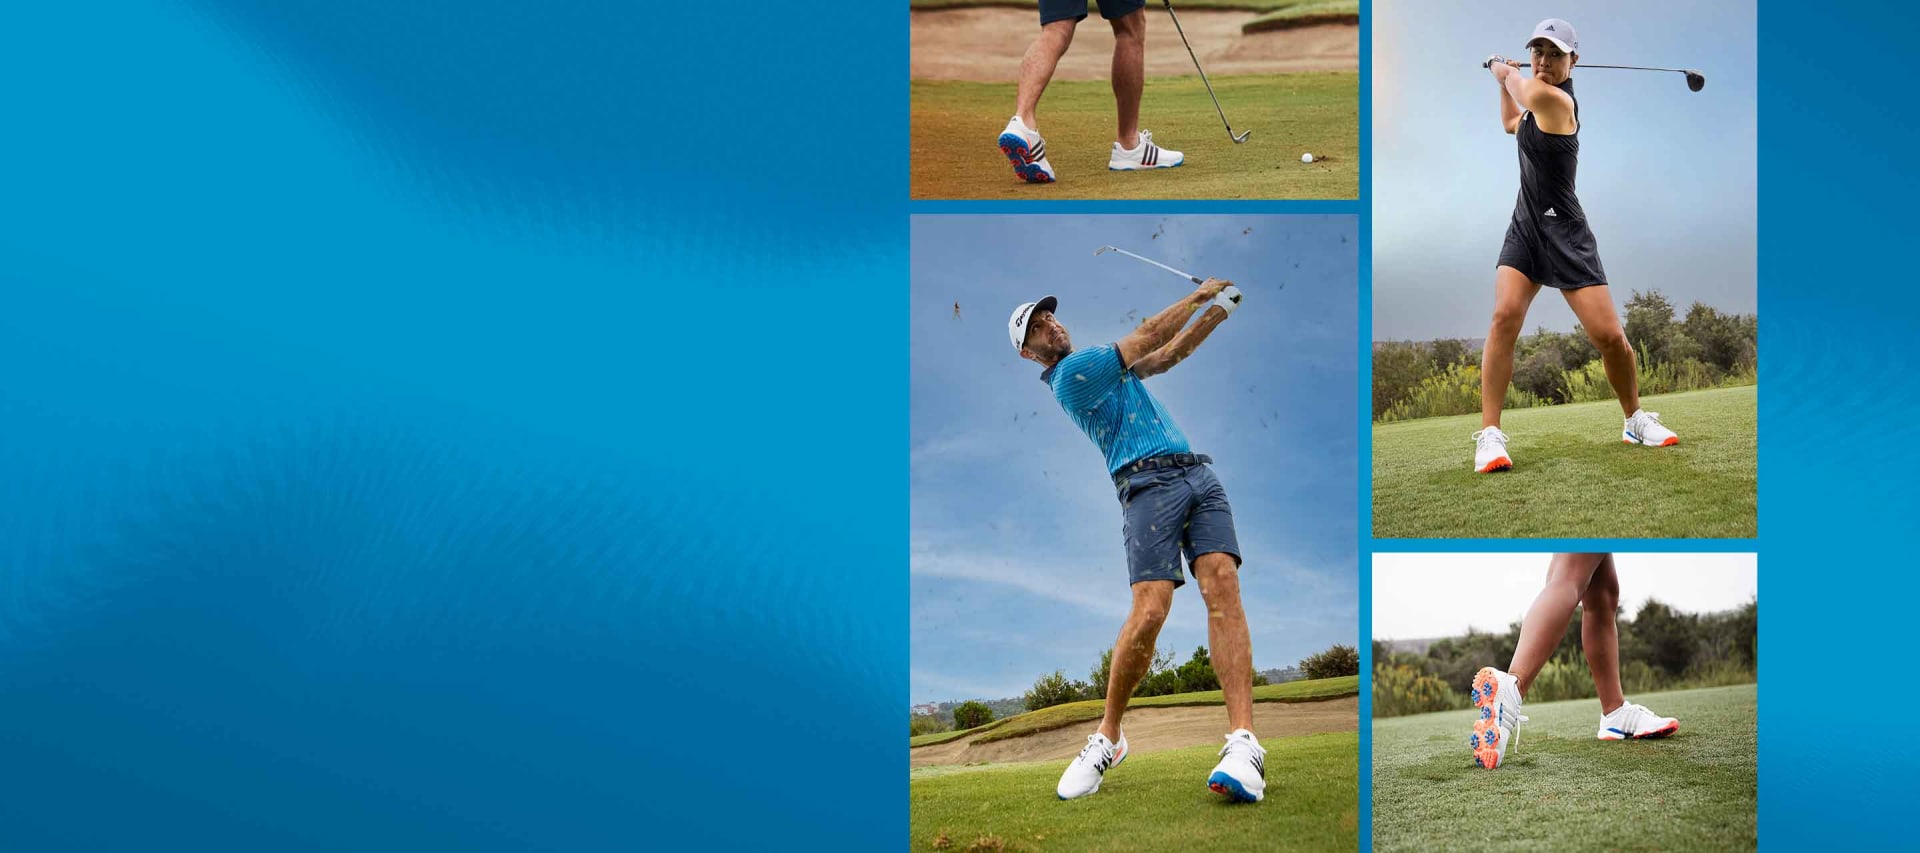 Dustin Johnson and Danielle Kang swinging a golf club in the Tour360 golf shoes